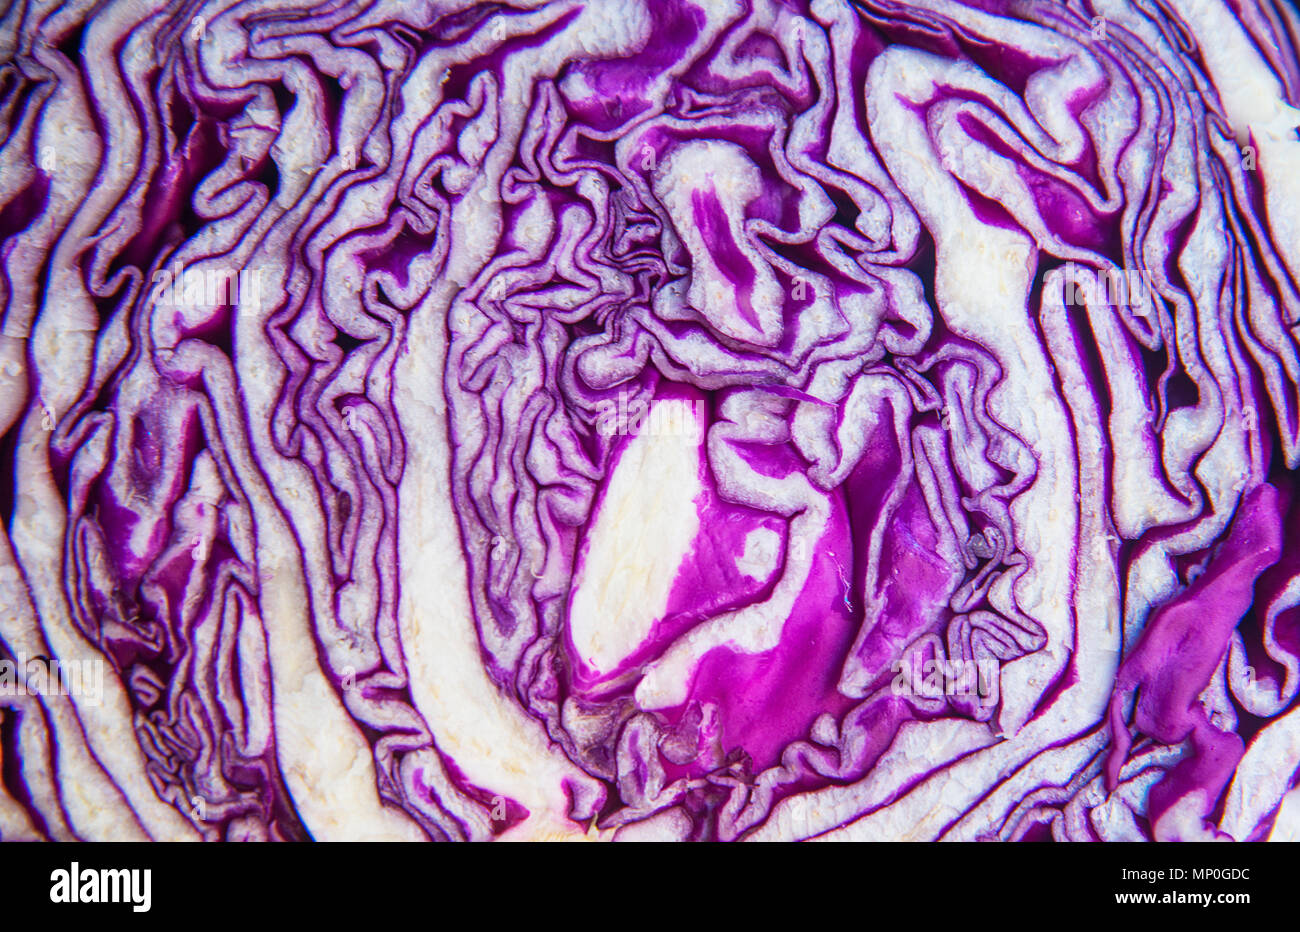 Cut red cabbage. Stock Photo